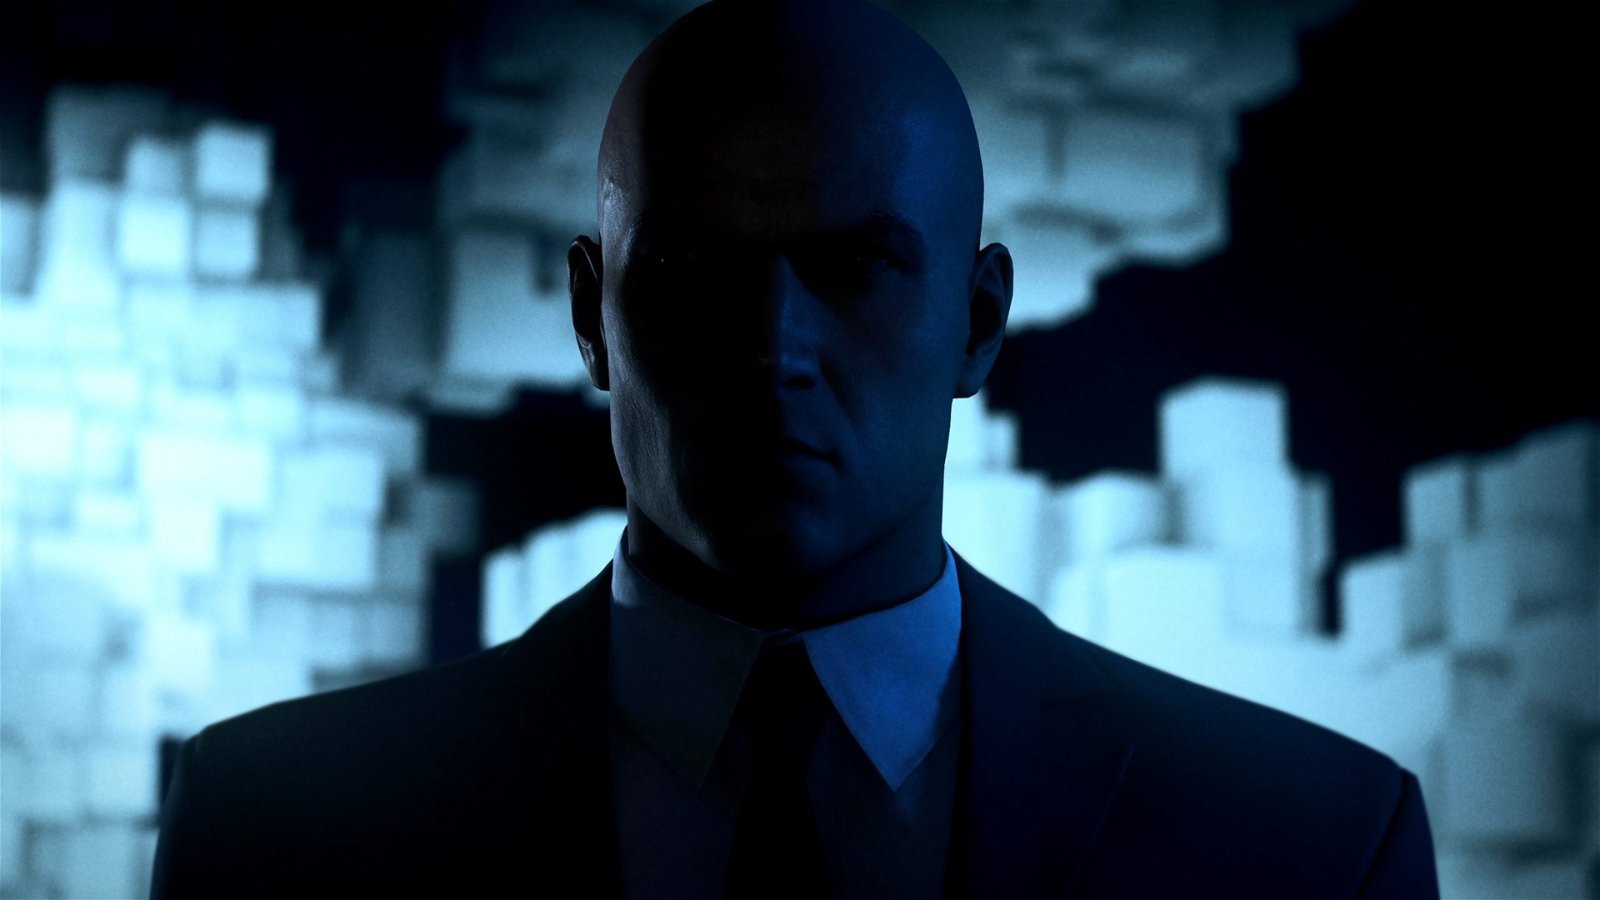 Xbox Rumored To Be Working With Hitman Developer IO Interactive On New IP Codenamed "Project Dragon"